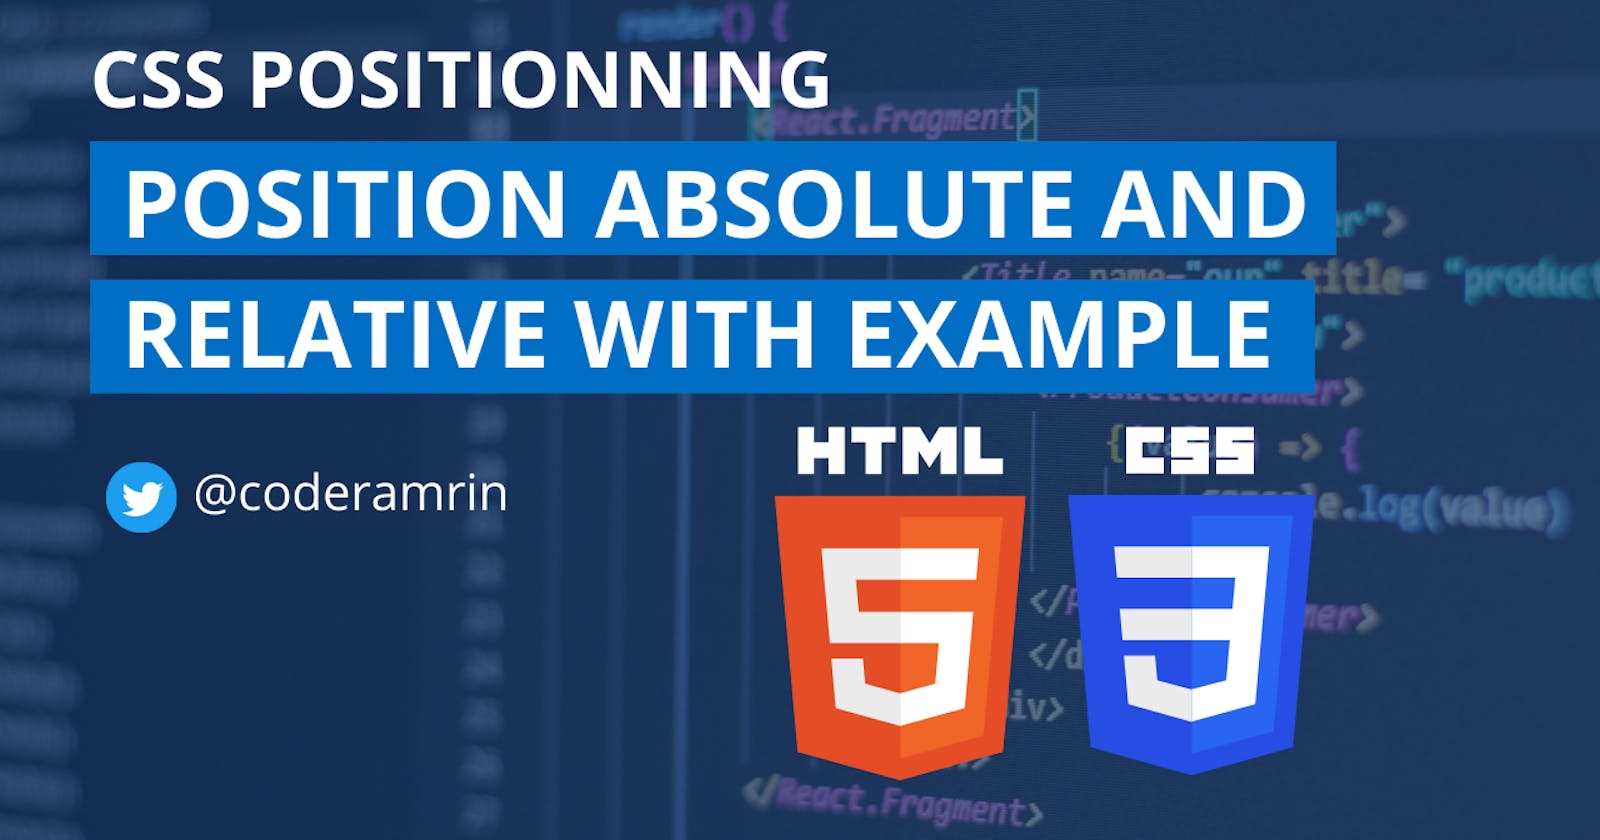 CSS Positioning: Position absolute and relative with example